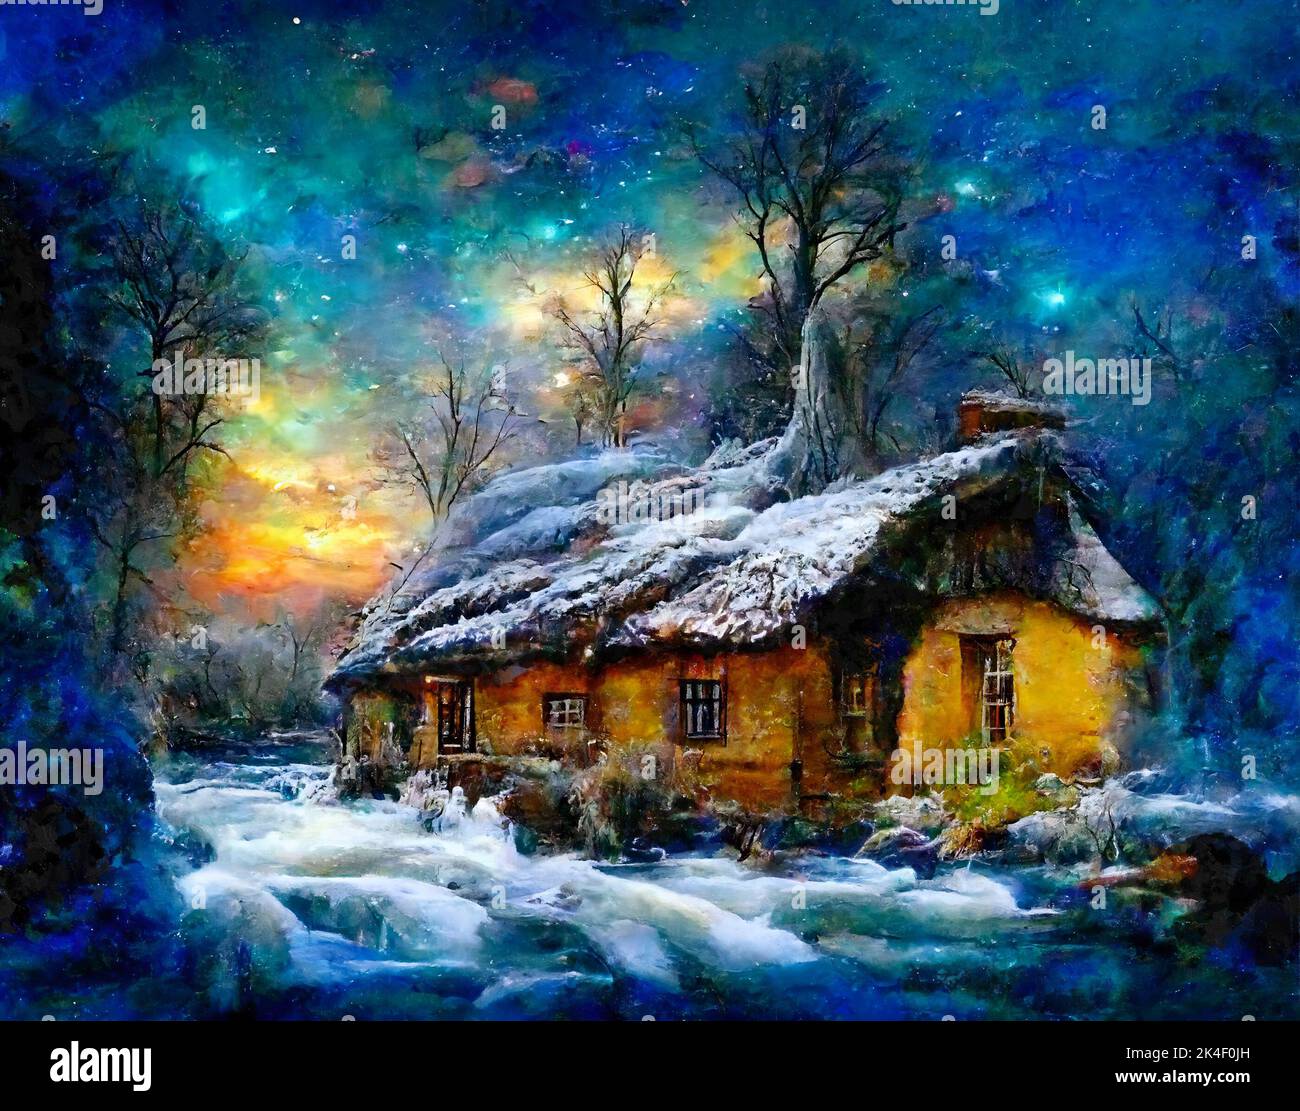 Fantasy cottage in winter snow landscape with northern lights on sky Stock Photo